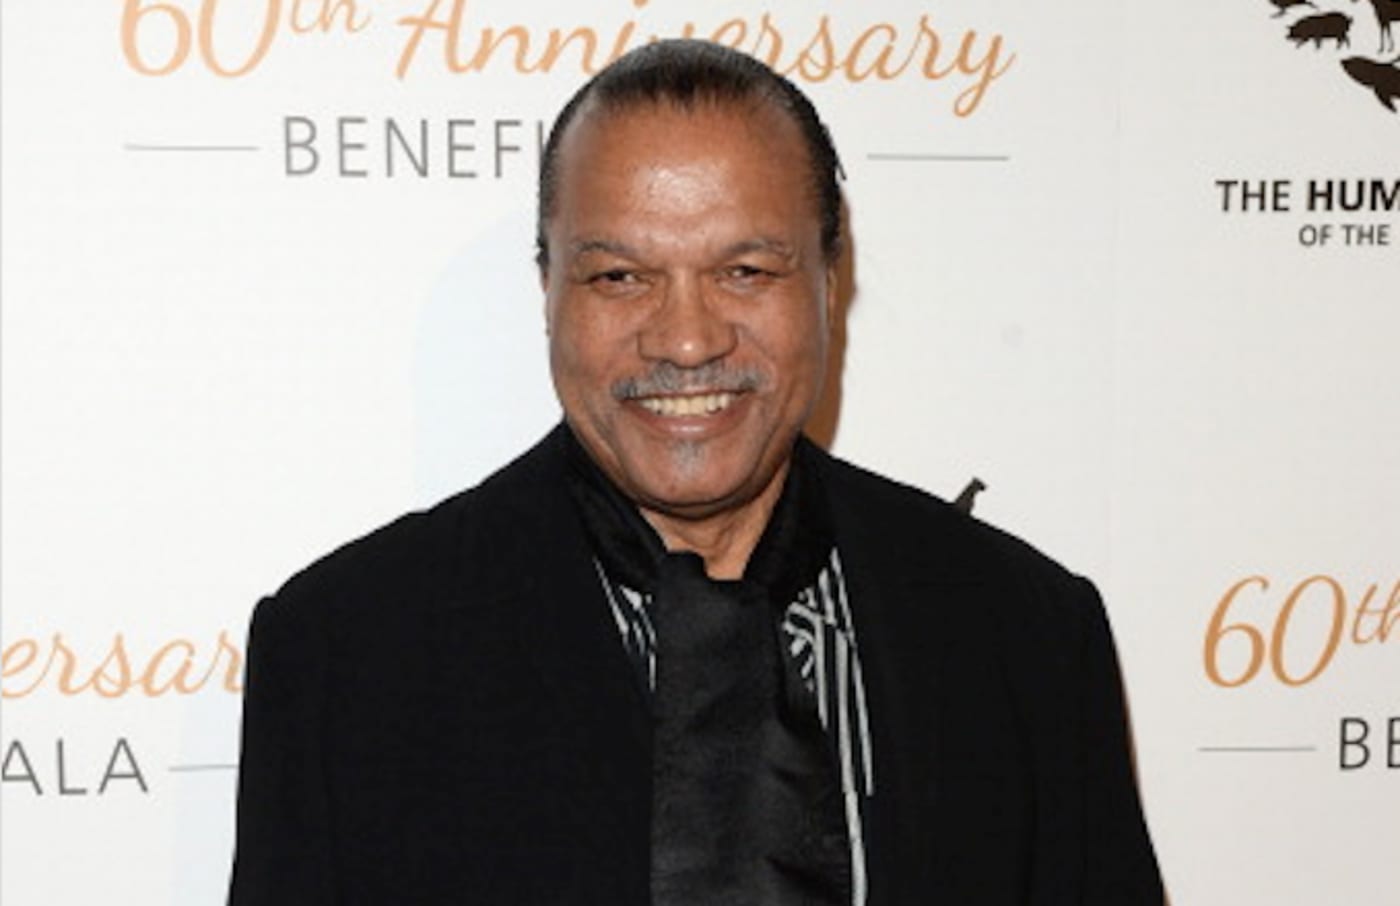 Billy Dee Williams attends the Humane Society of The United States 60th Anniversary Gala